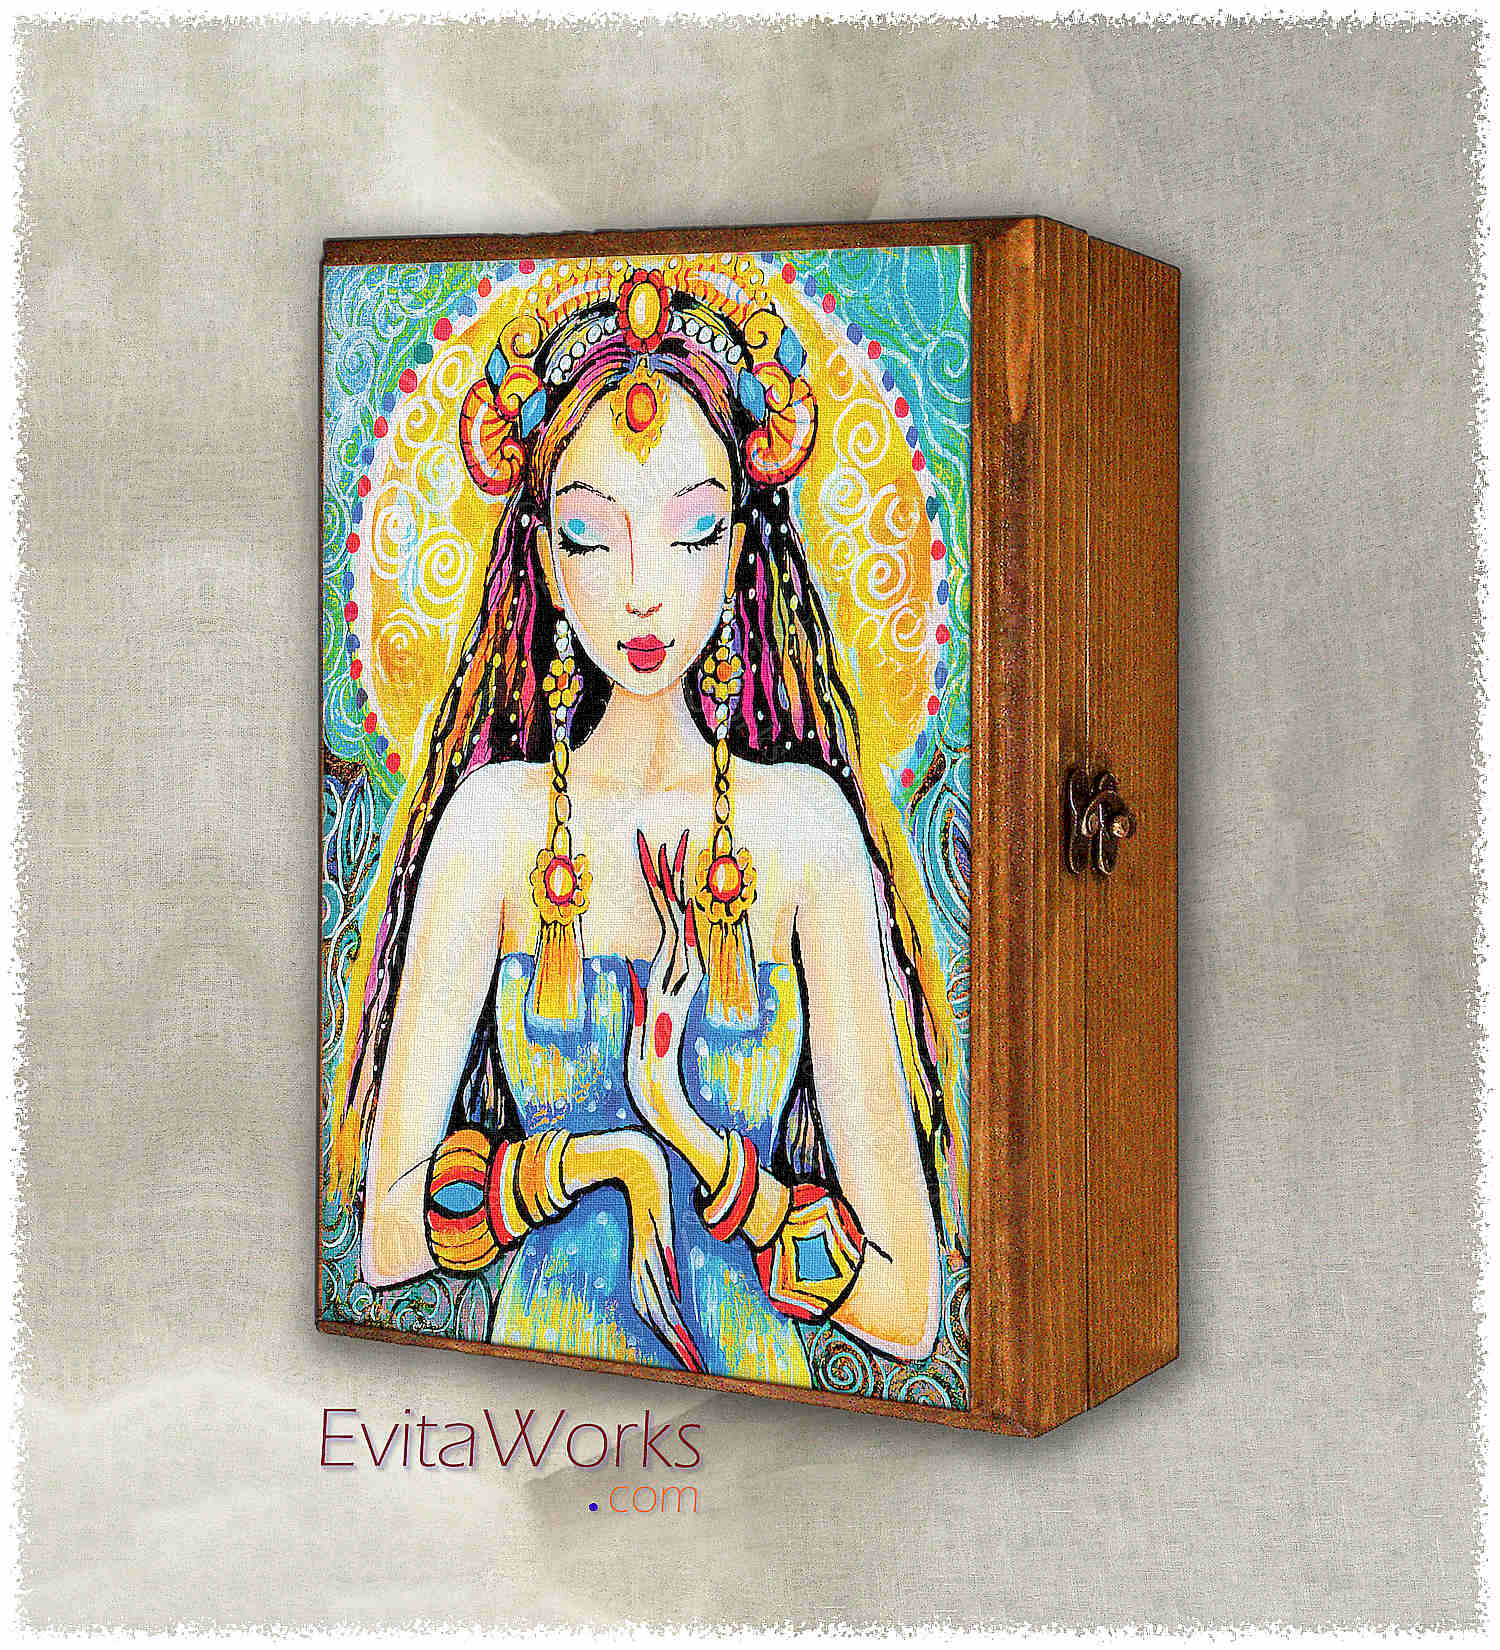 Hit to learn about "Quan Yin, Goddess of Mercy and Compassion" on jewelboxes